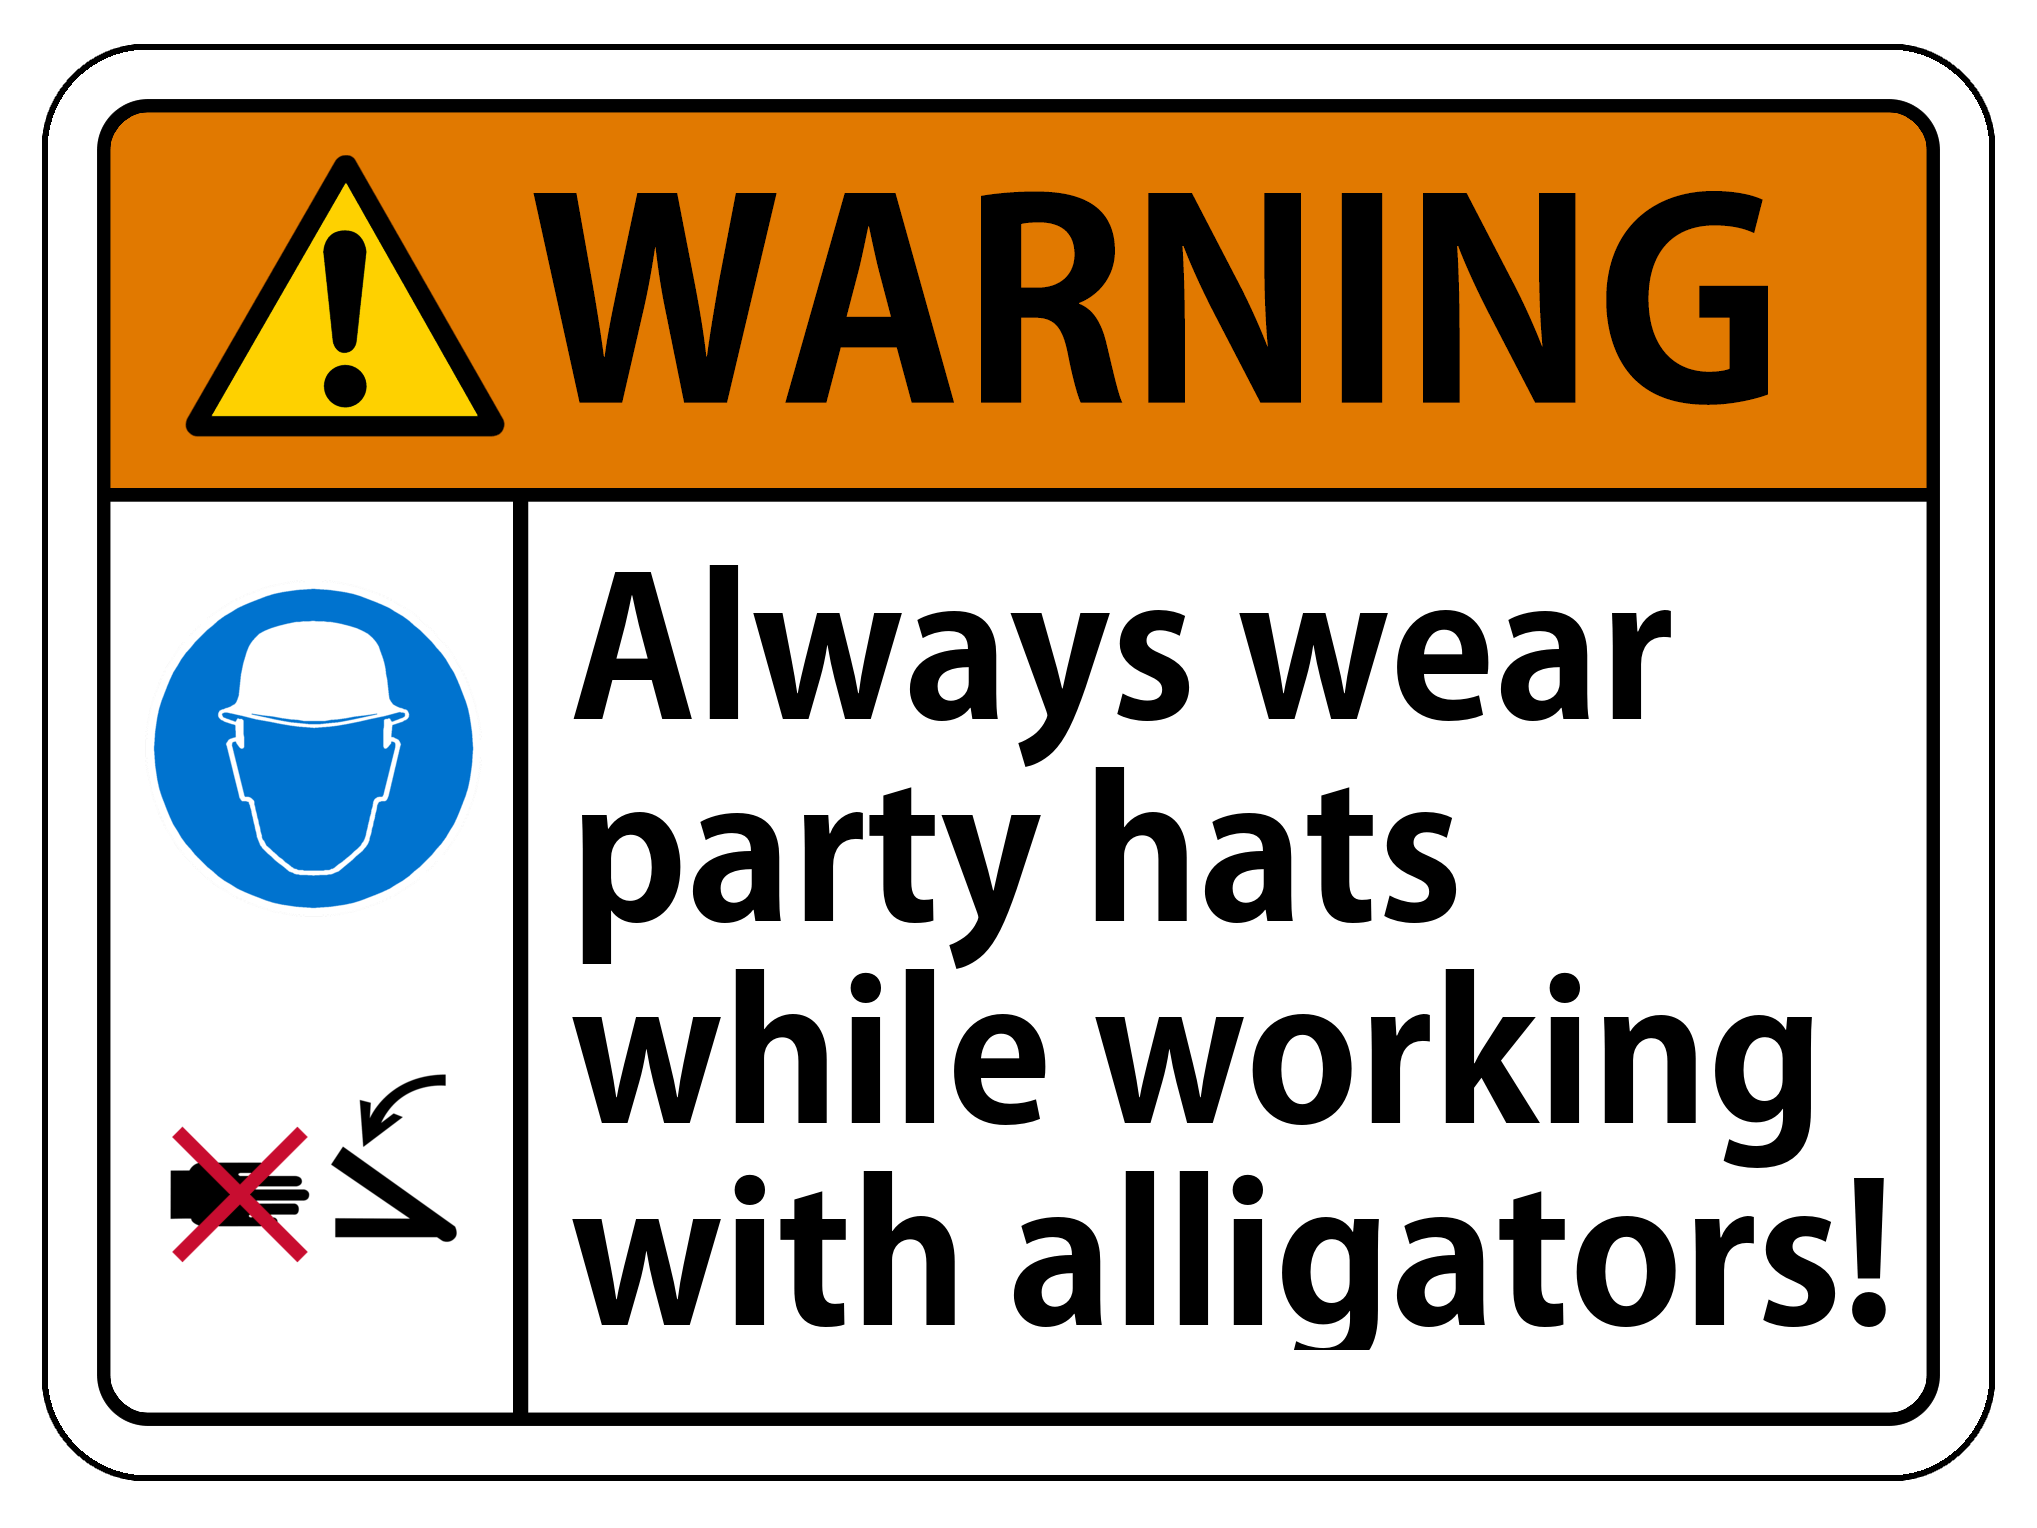 Harzard sign with the words 'Warning. Always wear part hats while working with alligators!'